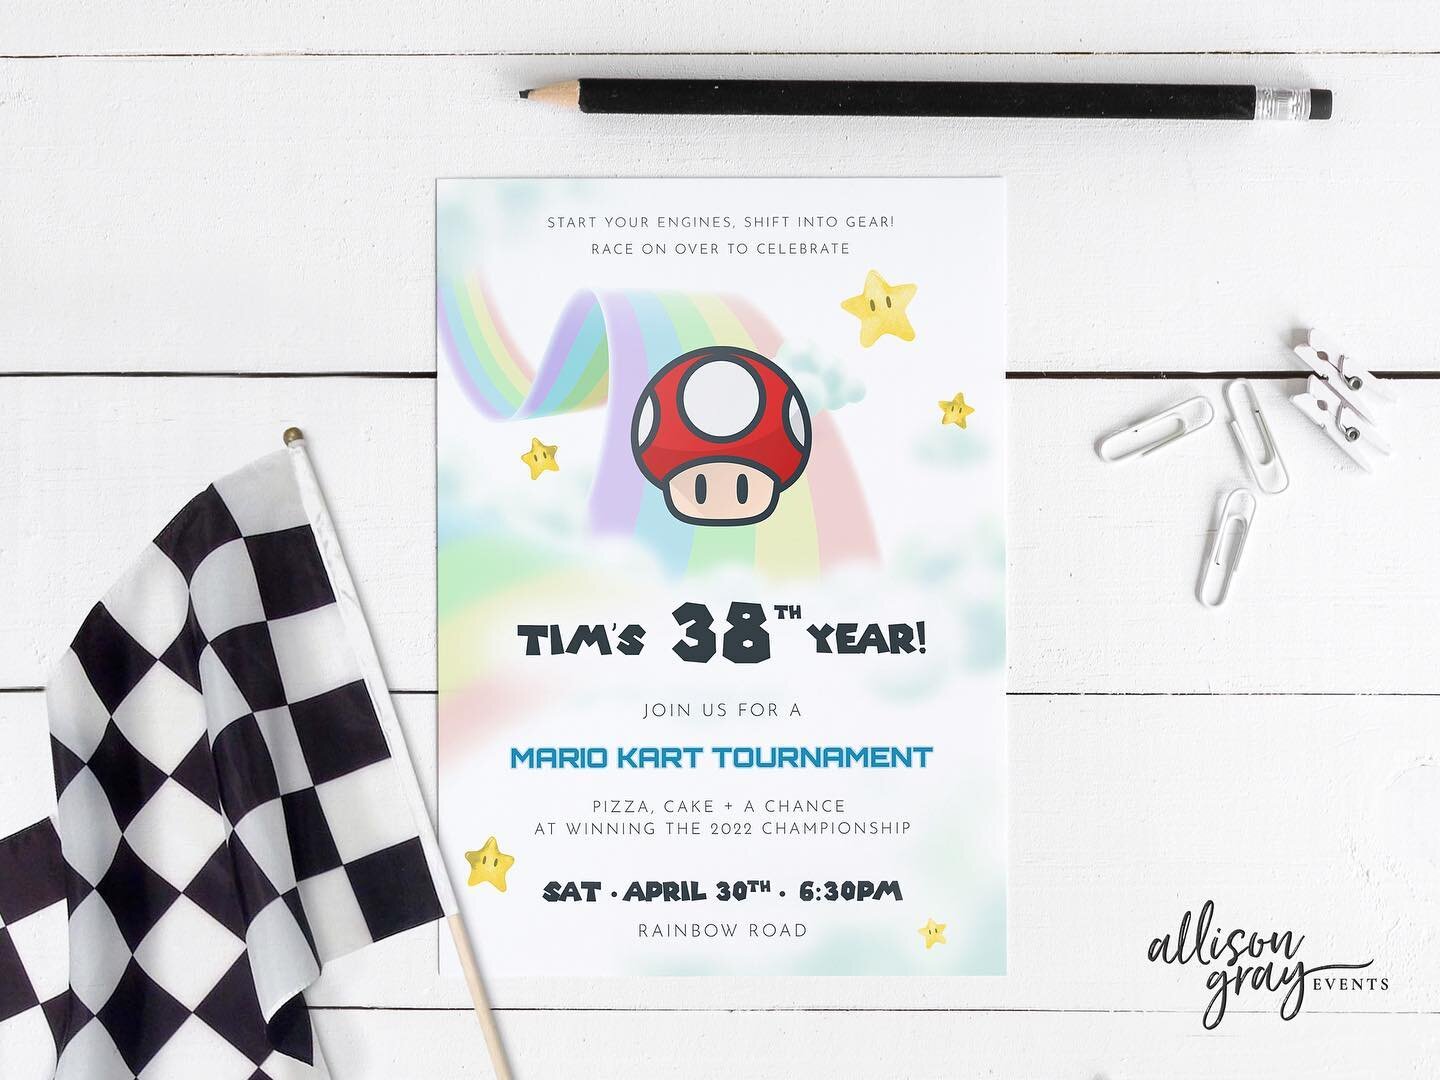 Etsy Shop! 🎉

Check out these cute printables we made to match our Mario Kart themed party! 💜

Have a theme in mind you don&rsquo;t see in our shop? Let us know in the comments below! ⬇️

Design: @allisongrayevents
.
.
.
.
#allisongrayevents #calga